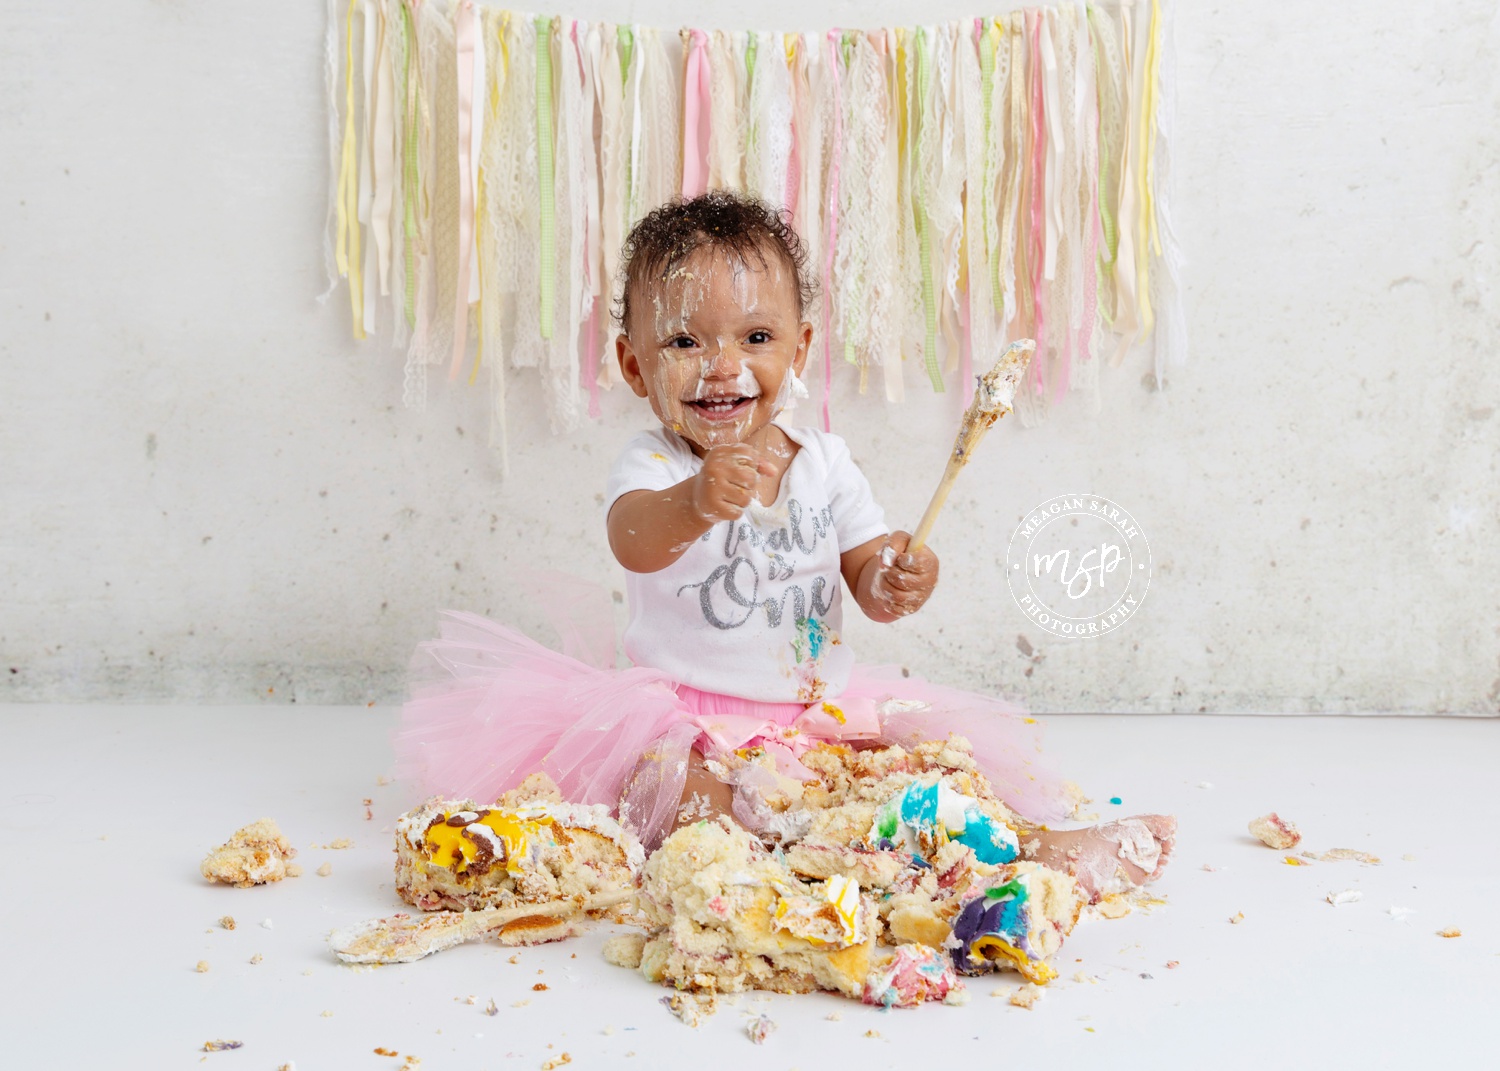 Baby fun,Baby Girl,Birthday Idea,Cake,Cake smash,Cake smash ideas,First Birthday,Funny cake smash,Funny face,Happy Birthday,Peach cake smash,Pink Cake,Tutu,Vintage background,1 year old photography leeds,Affordable photographer leeds,Baby Photographer Leeds,Baby Photography Leeds,Baby Pictures,Cute babies,Leeds Photographer,Little Ones,Meagan Sarah Photography,Professional Photographer in Leeds,West Yorkshire Photographer,